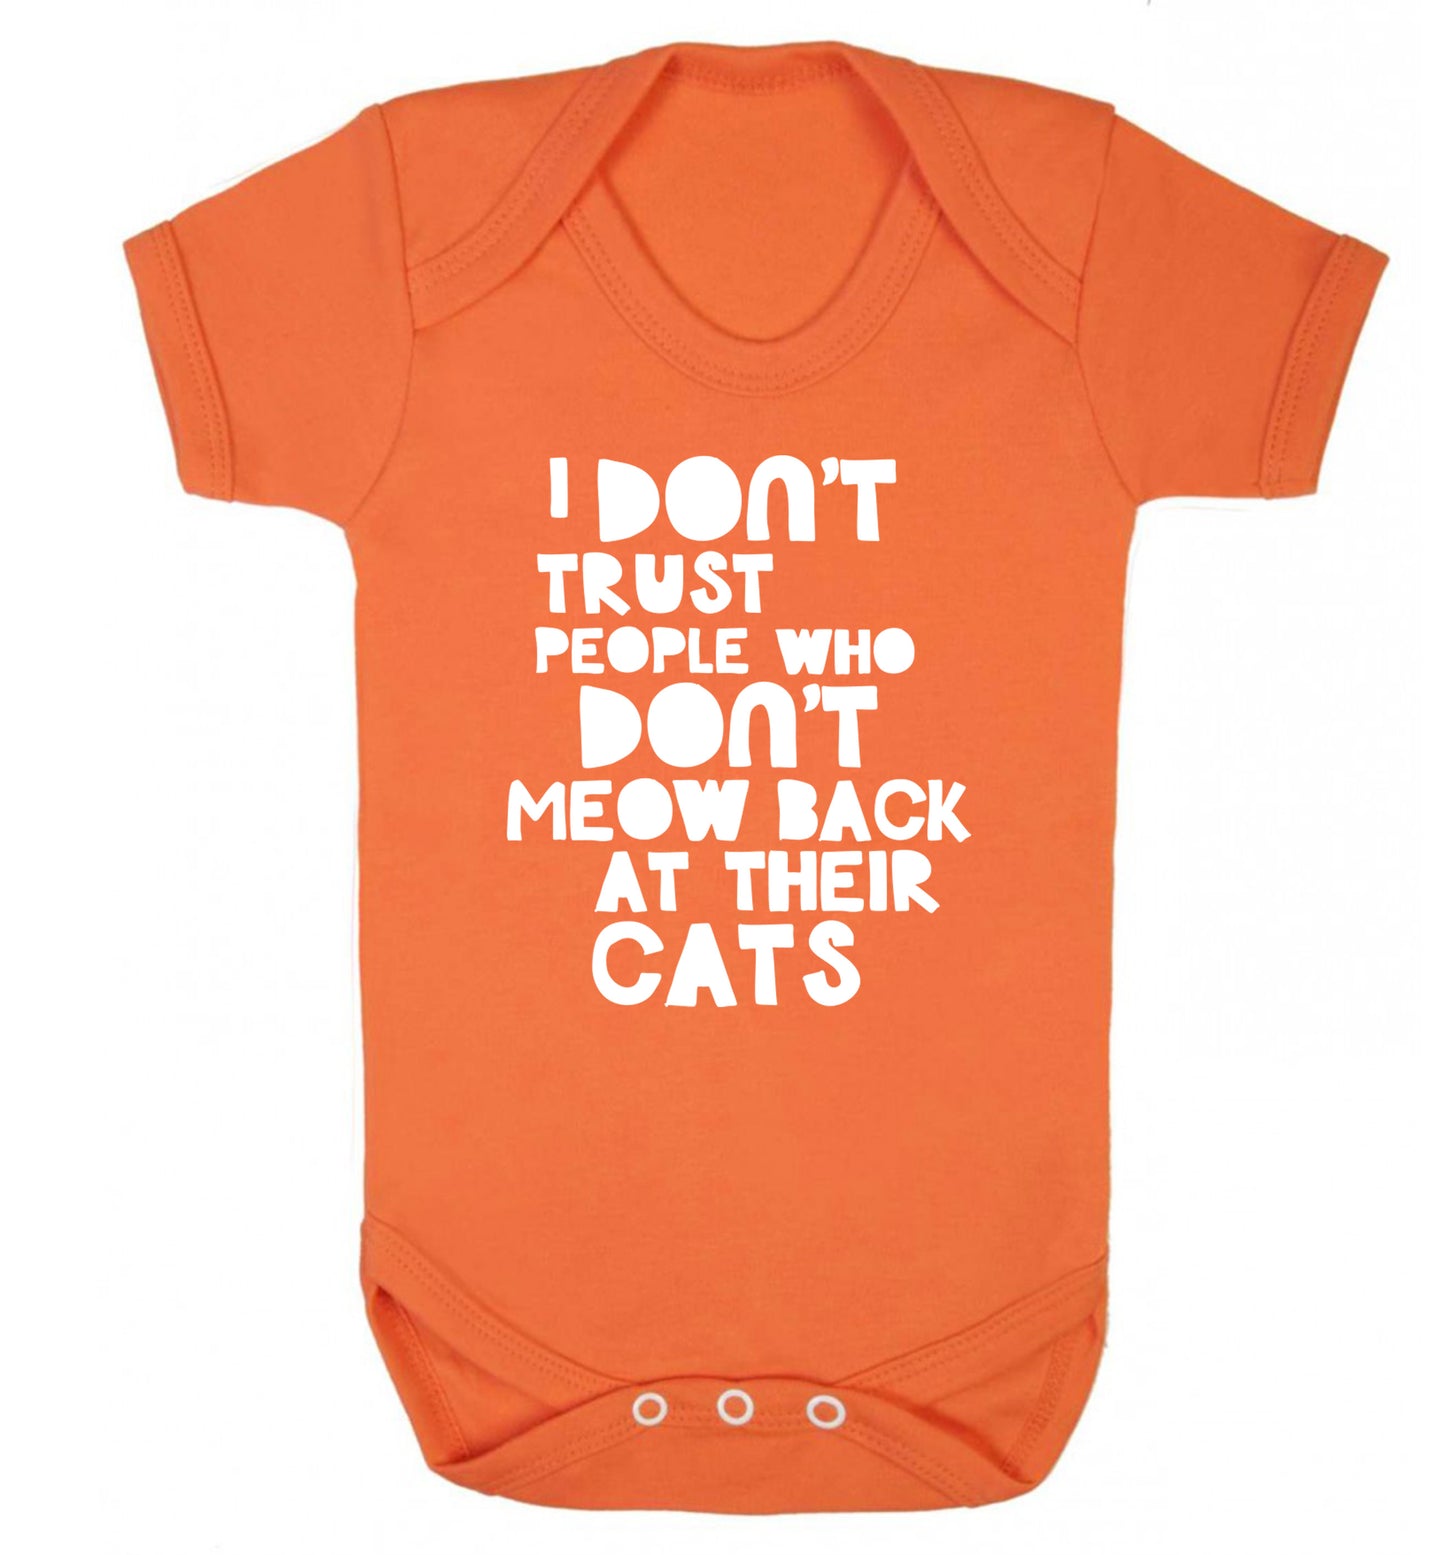 I don't trust people who don't meow back at their cats Baby Vest orange 18-24 months